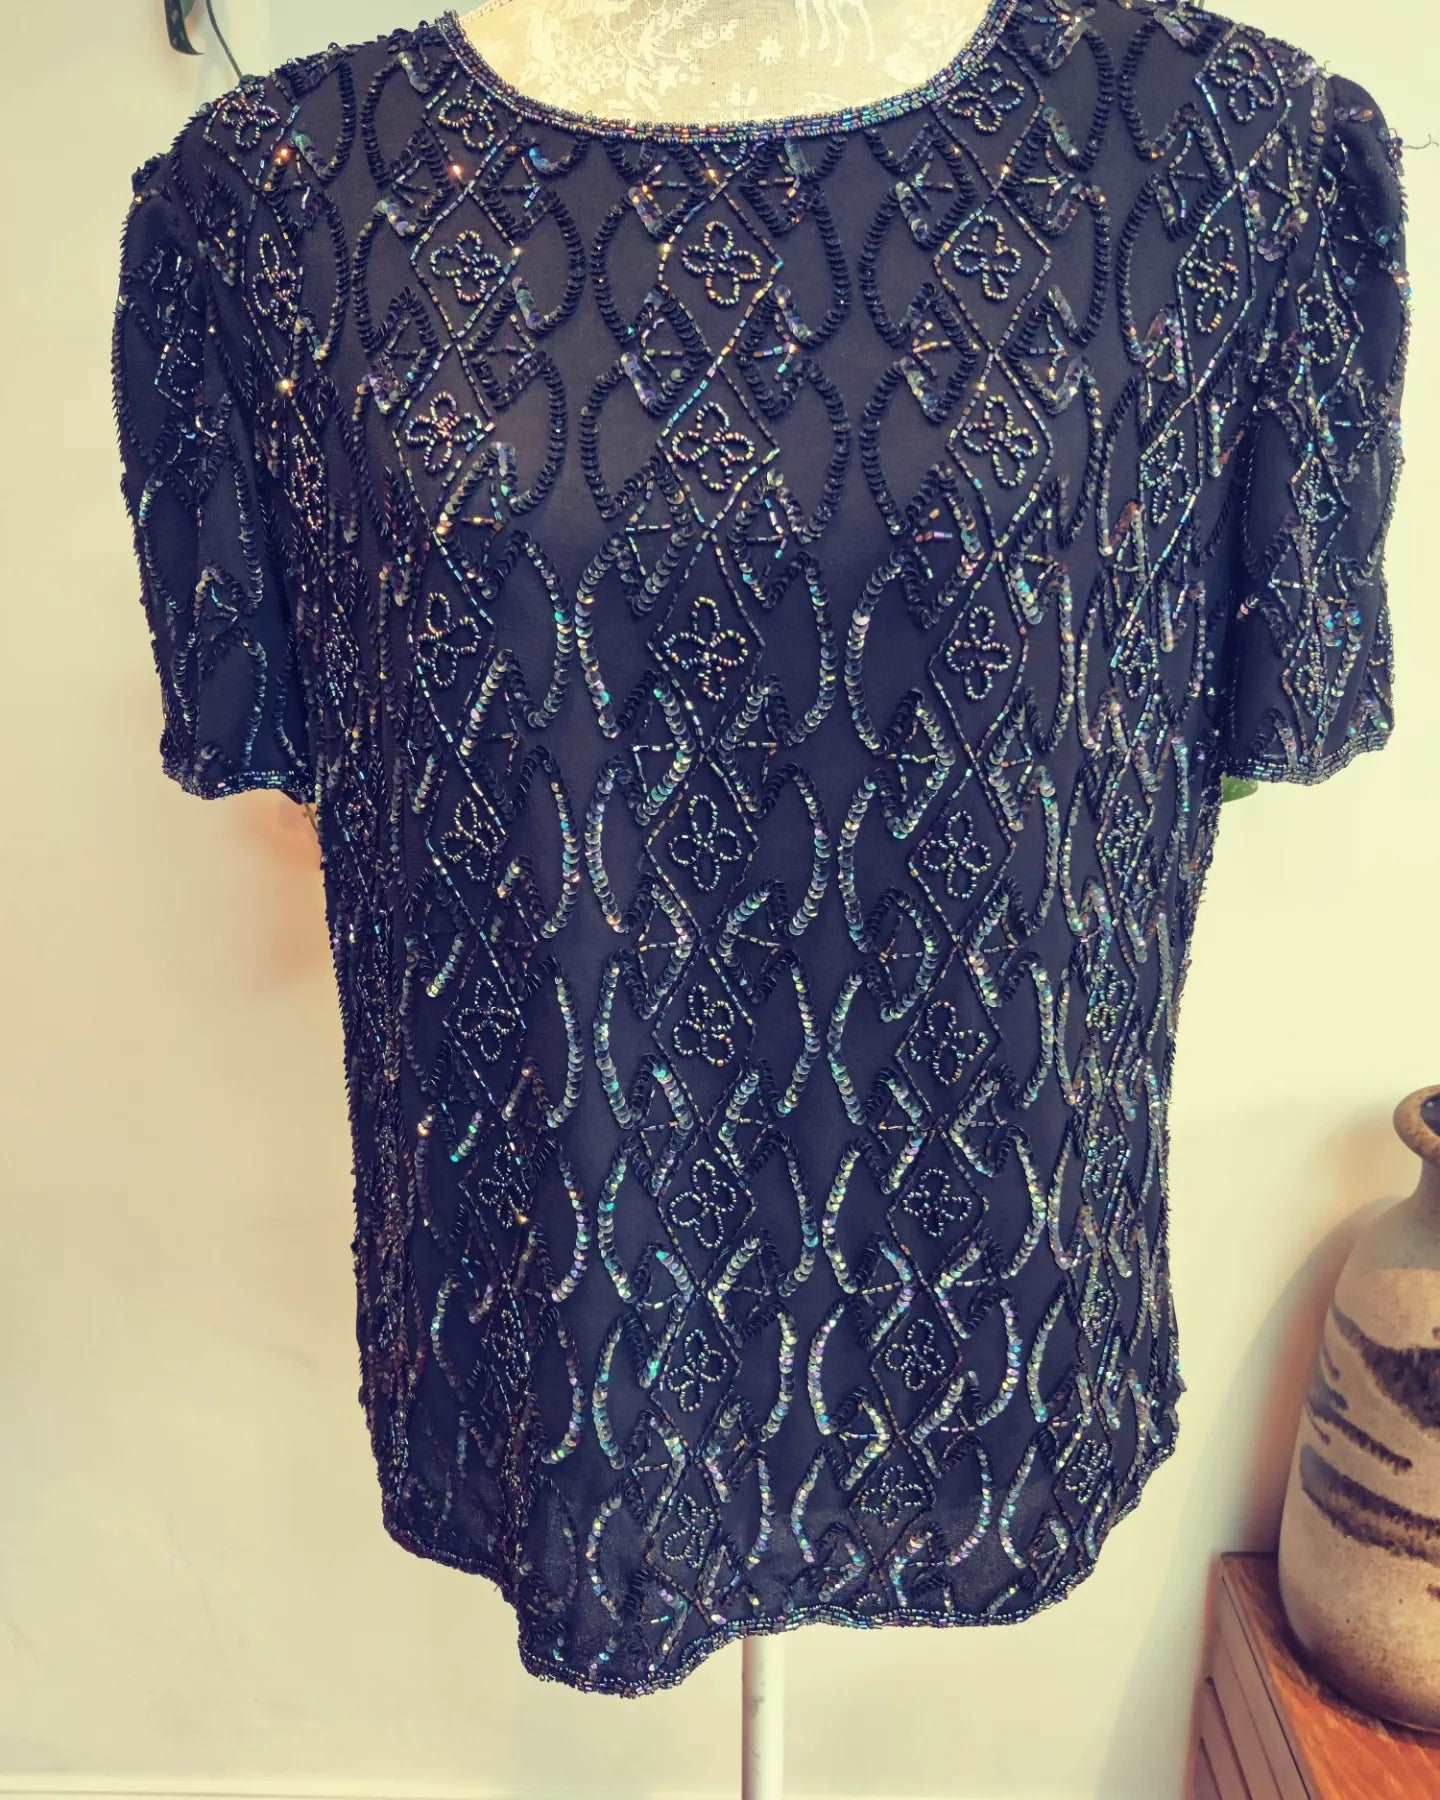 Stunning plus size vintage beaded top. Size 16-18